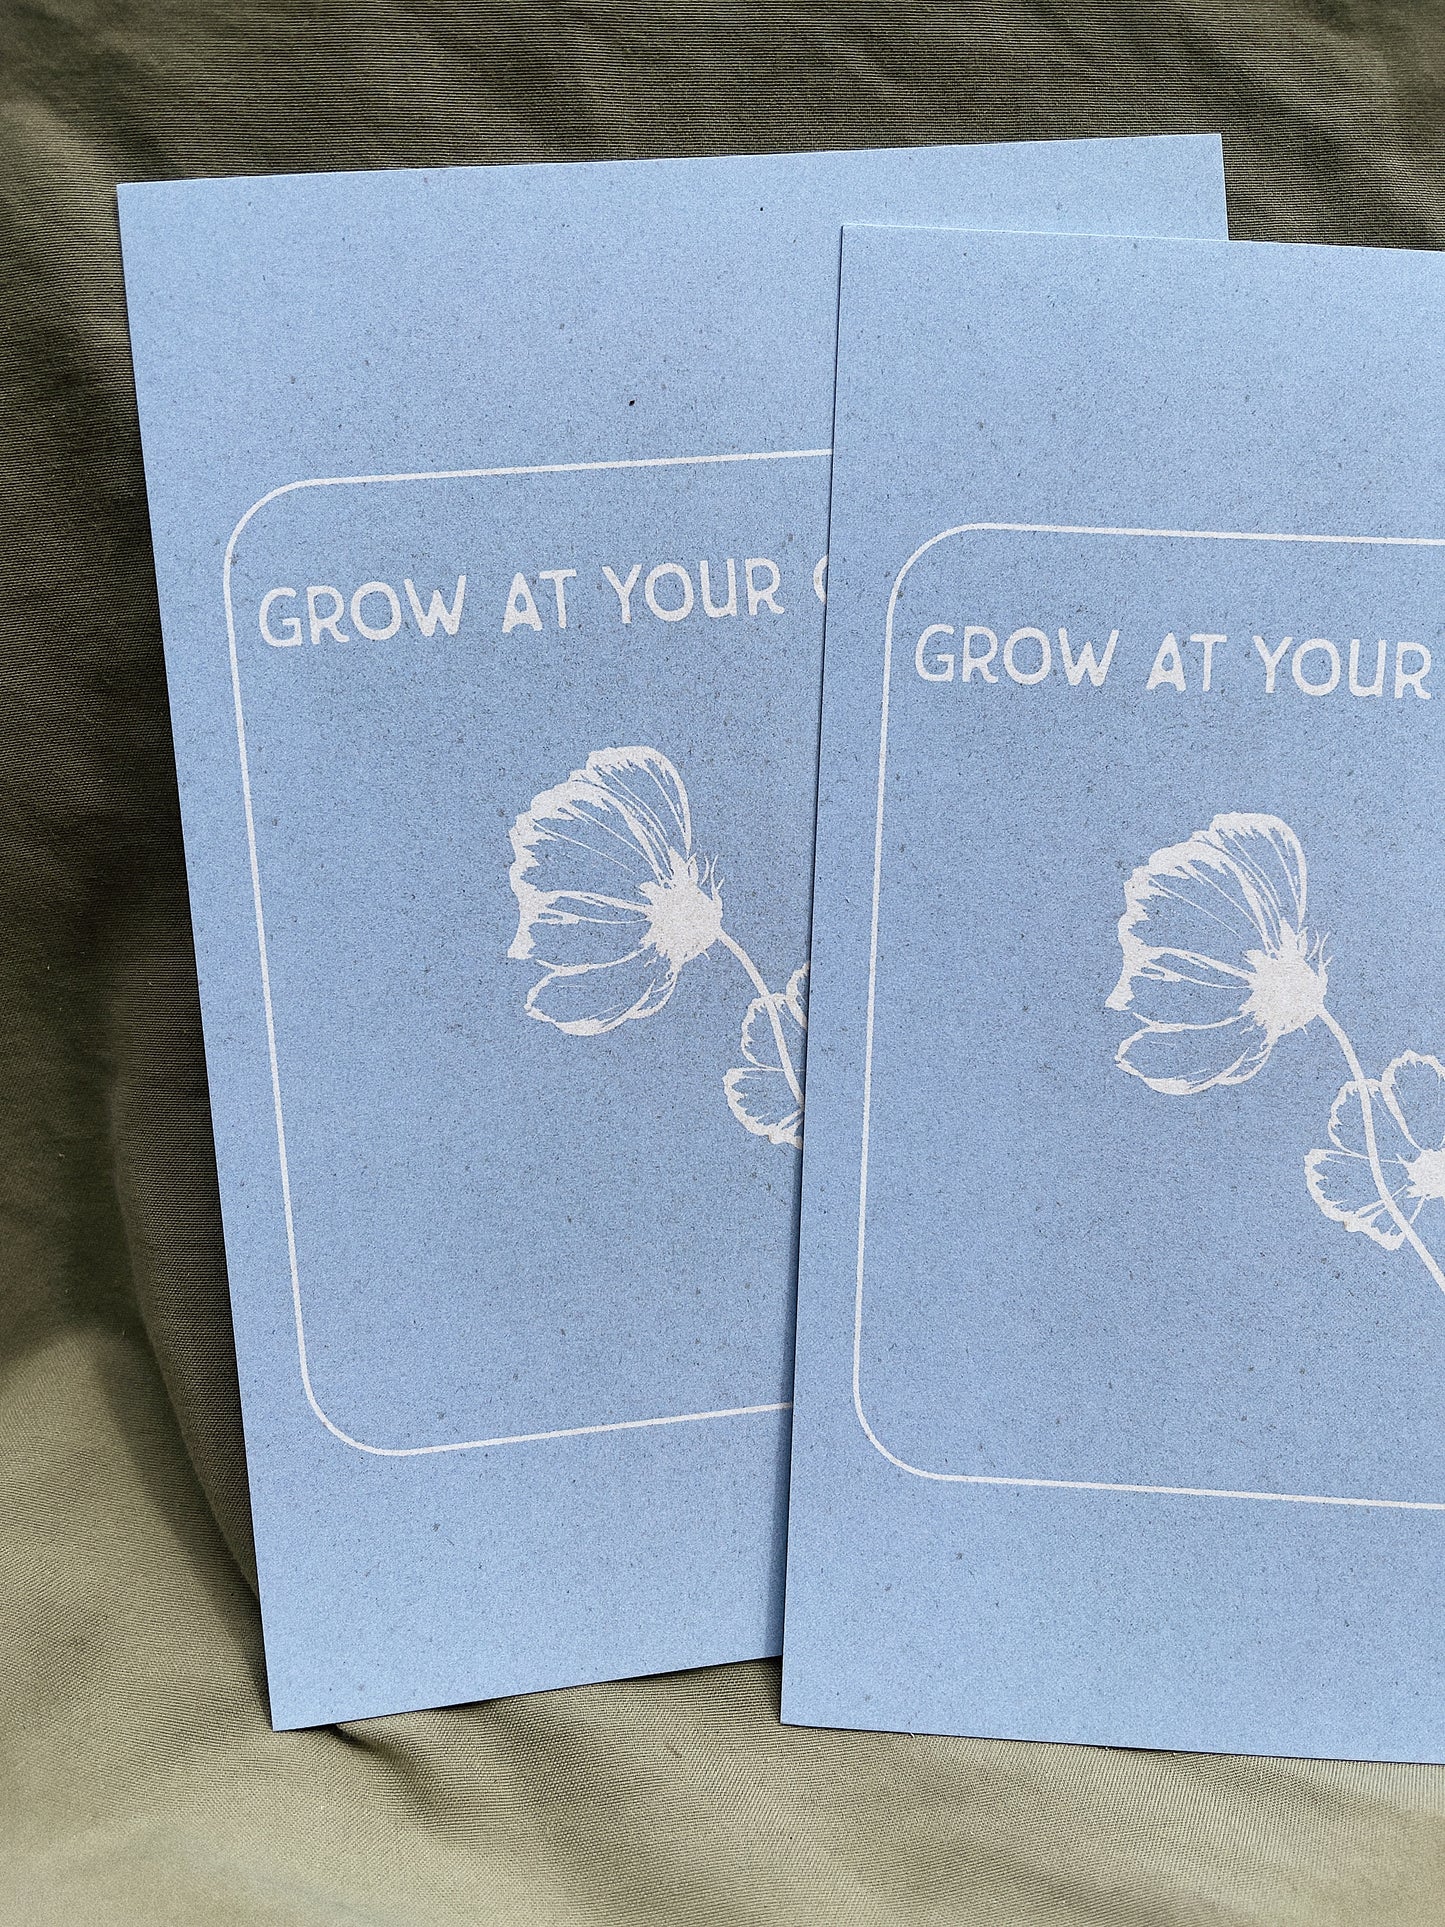 Grow at Your Own Pace – Print